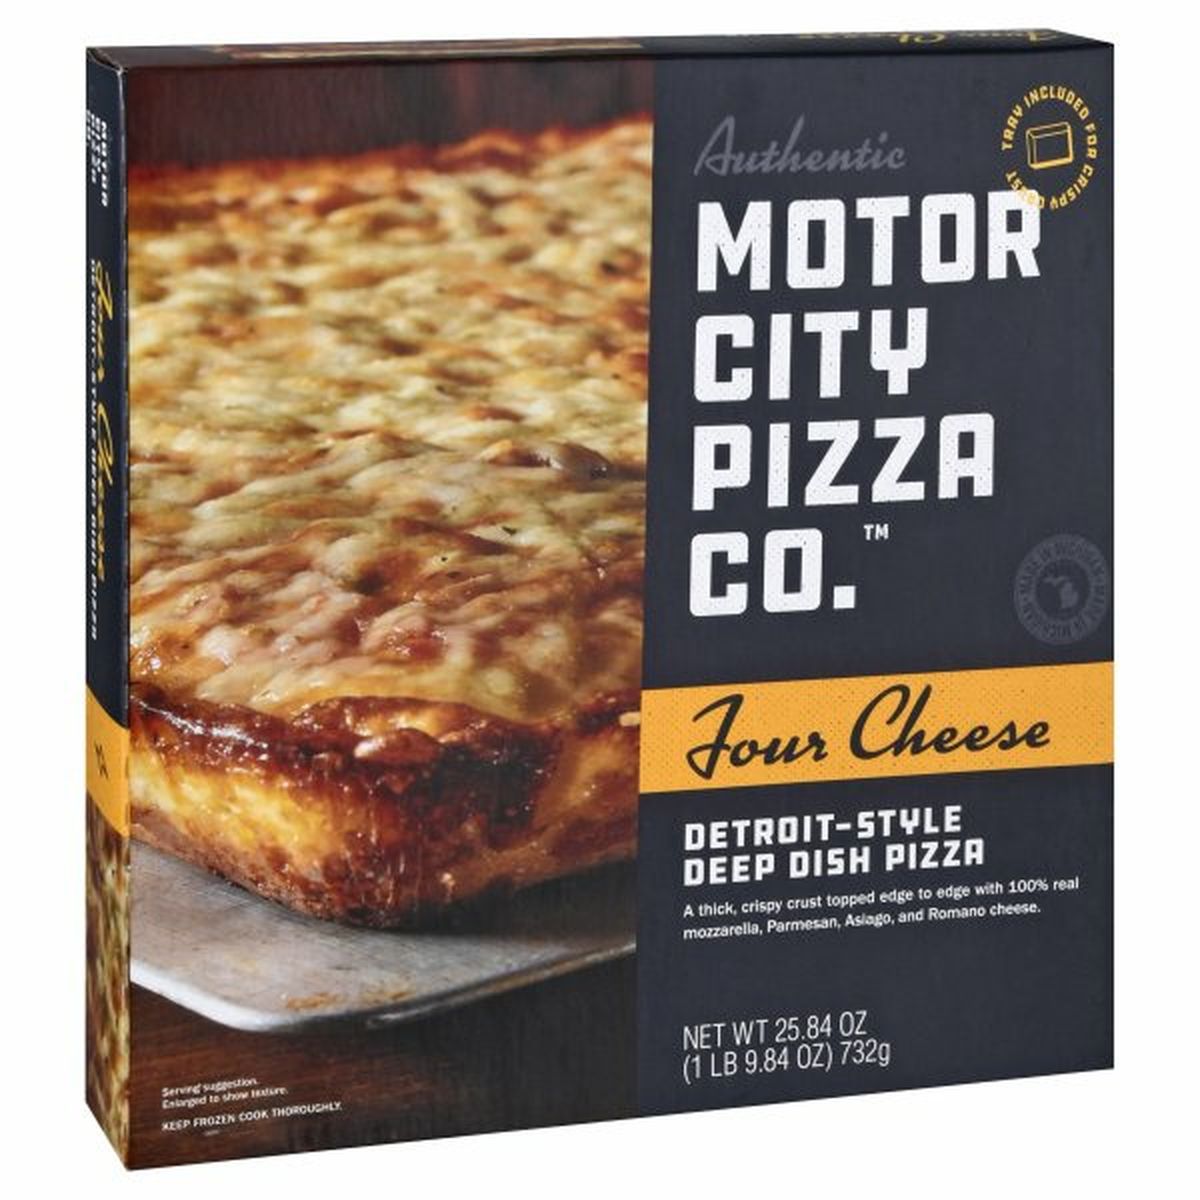 Calories in Motor City Pizza Pizza, Four Cheese